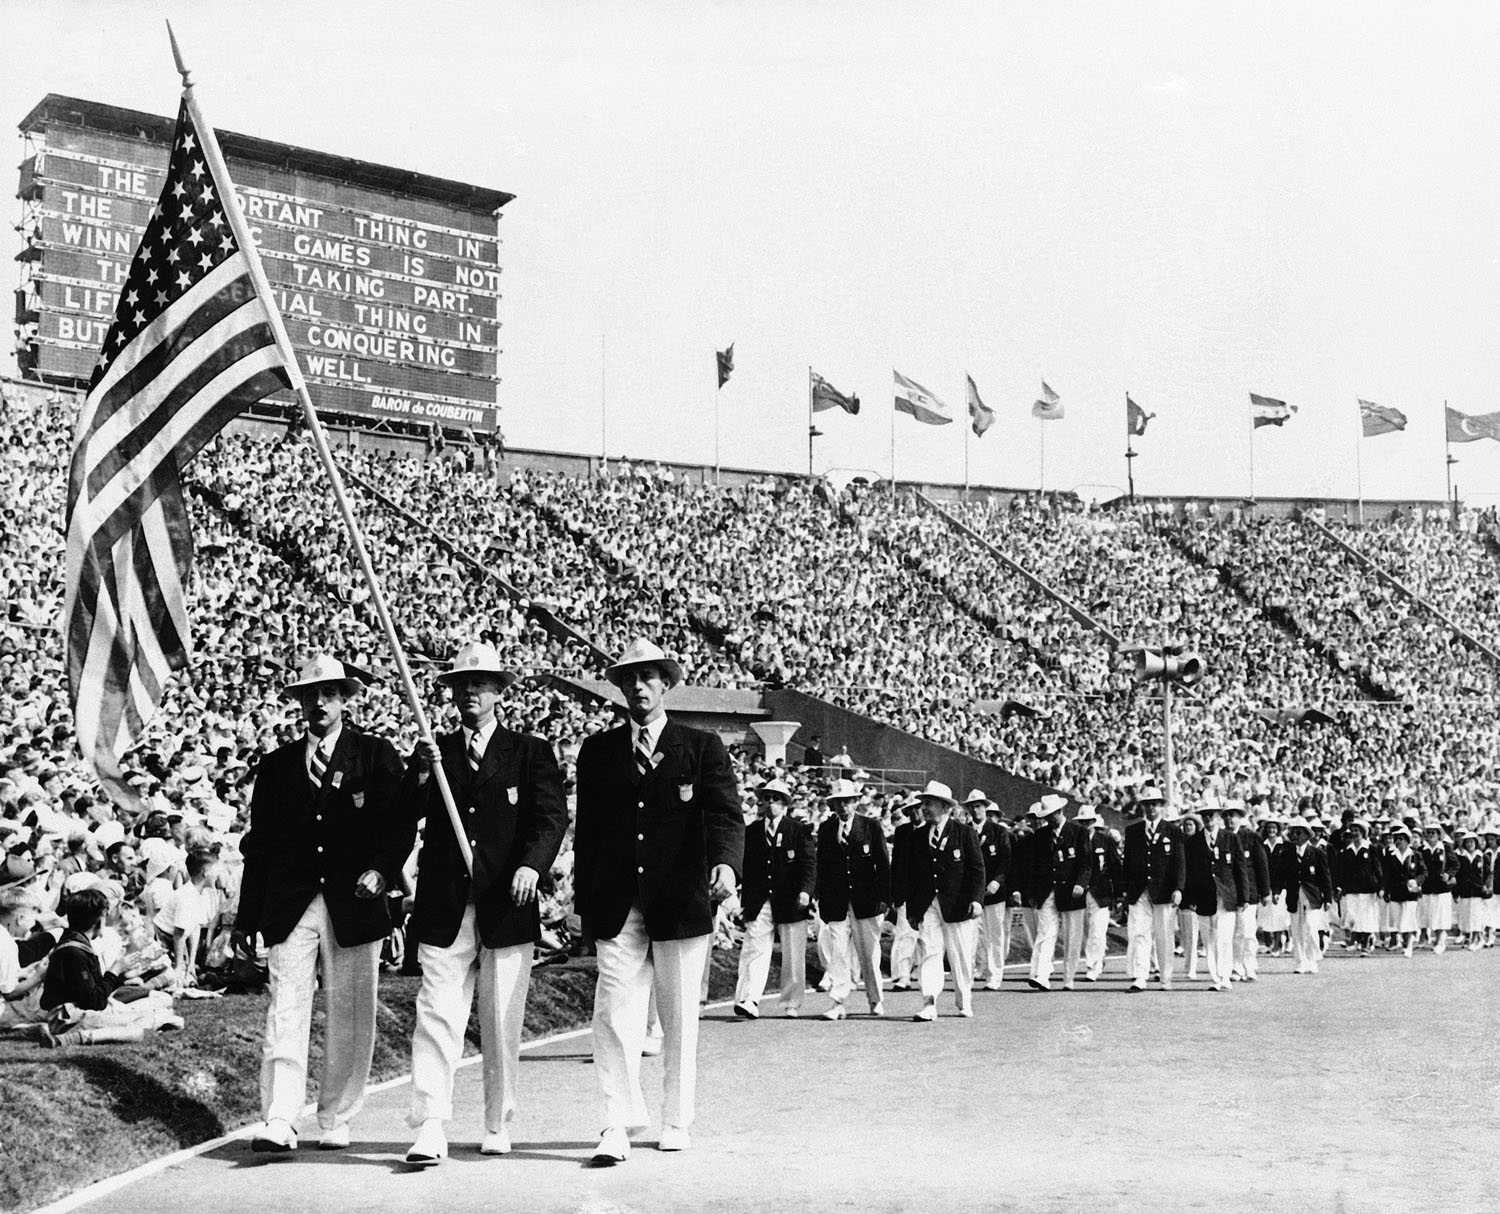 Yachter Ralph Craig, center, of Albany, N.Y., carries the American flag in the parade of the nations at the opening of the summer Olympic games in London's Wembley Stadium, July 29, 1948.